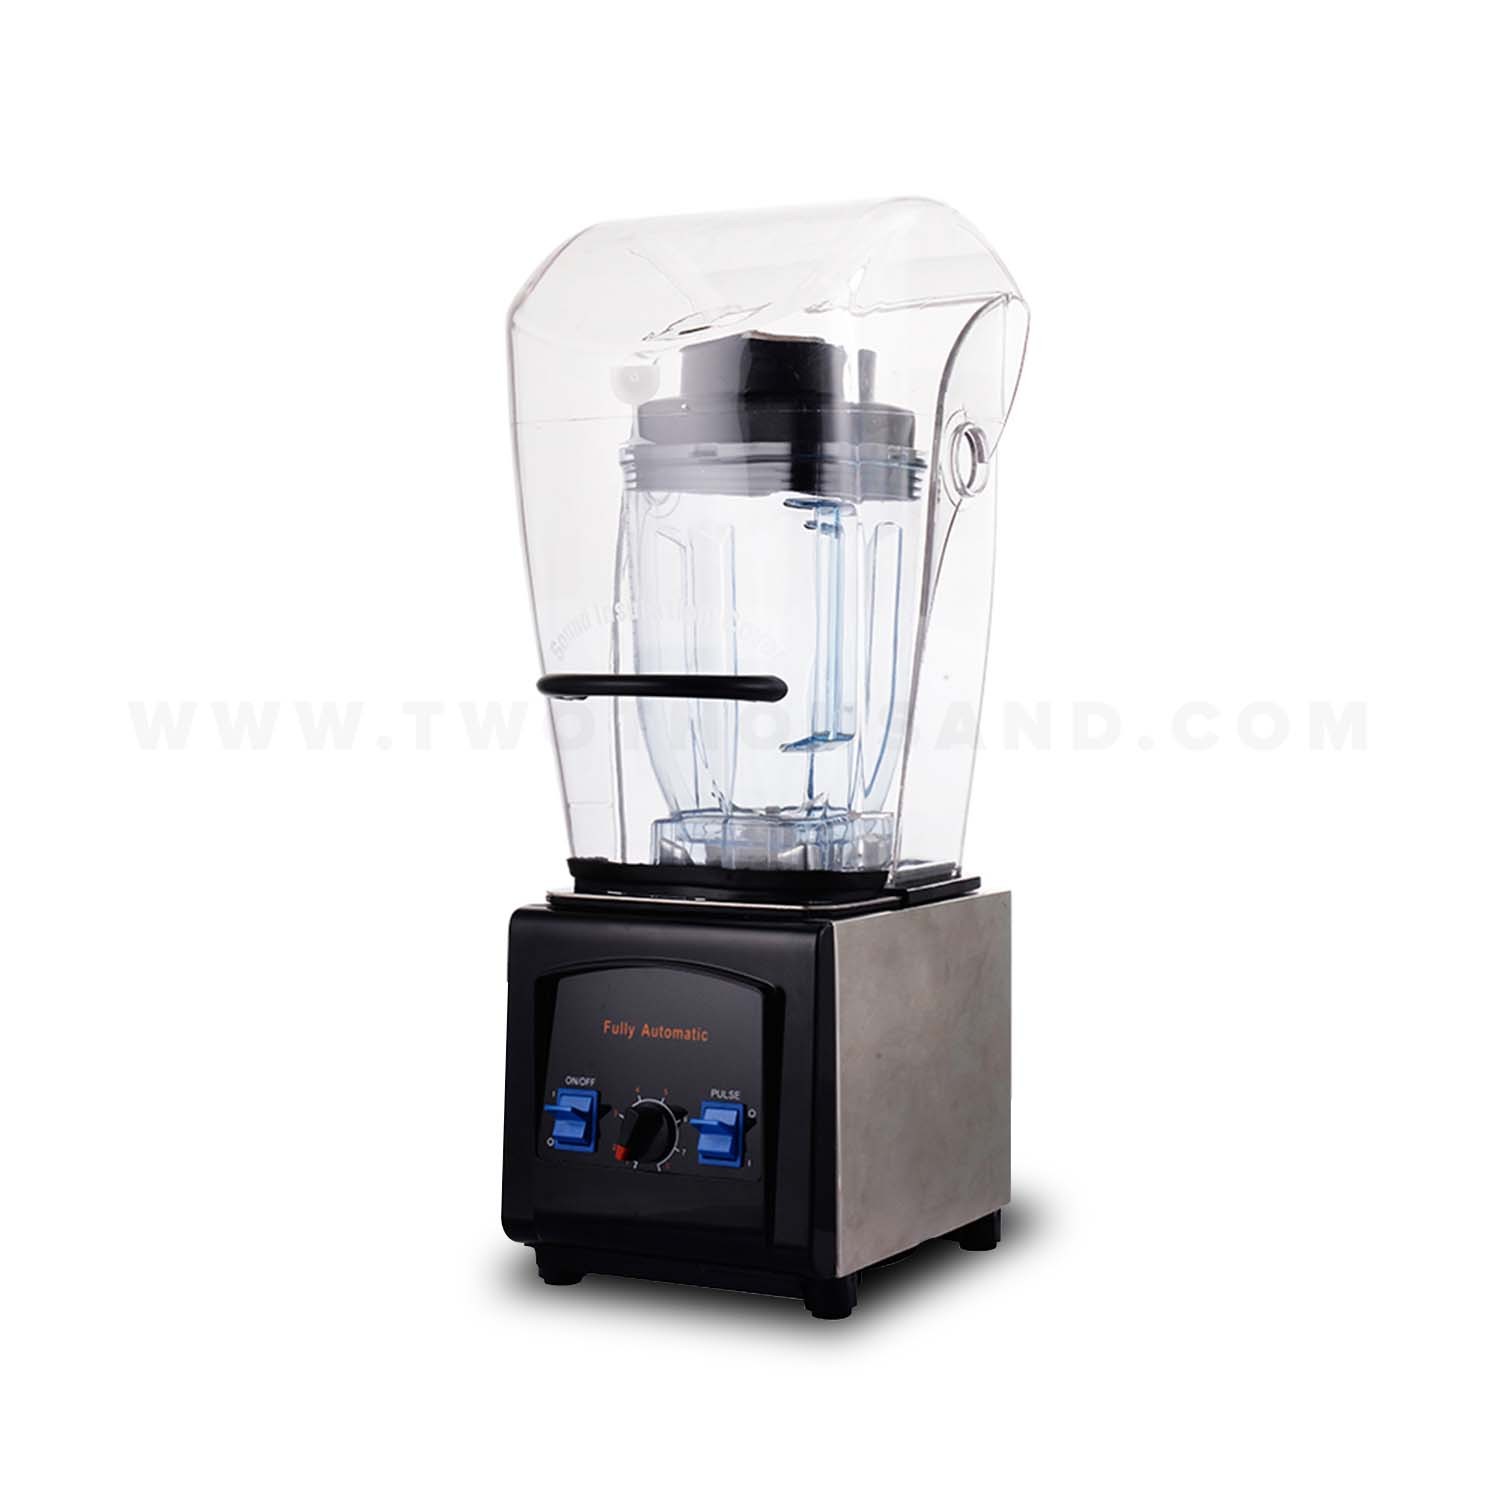 2.5L 2100W Mechanic Control Commercial Blender with Sound Proof Cover  TT-IC123C Chinese restaurant equipment manufacturer and wholesaler